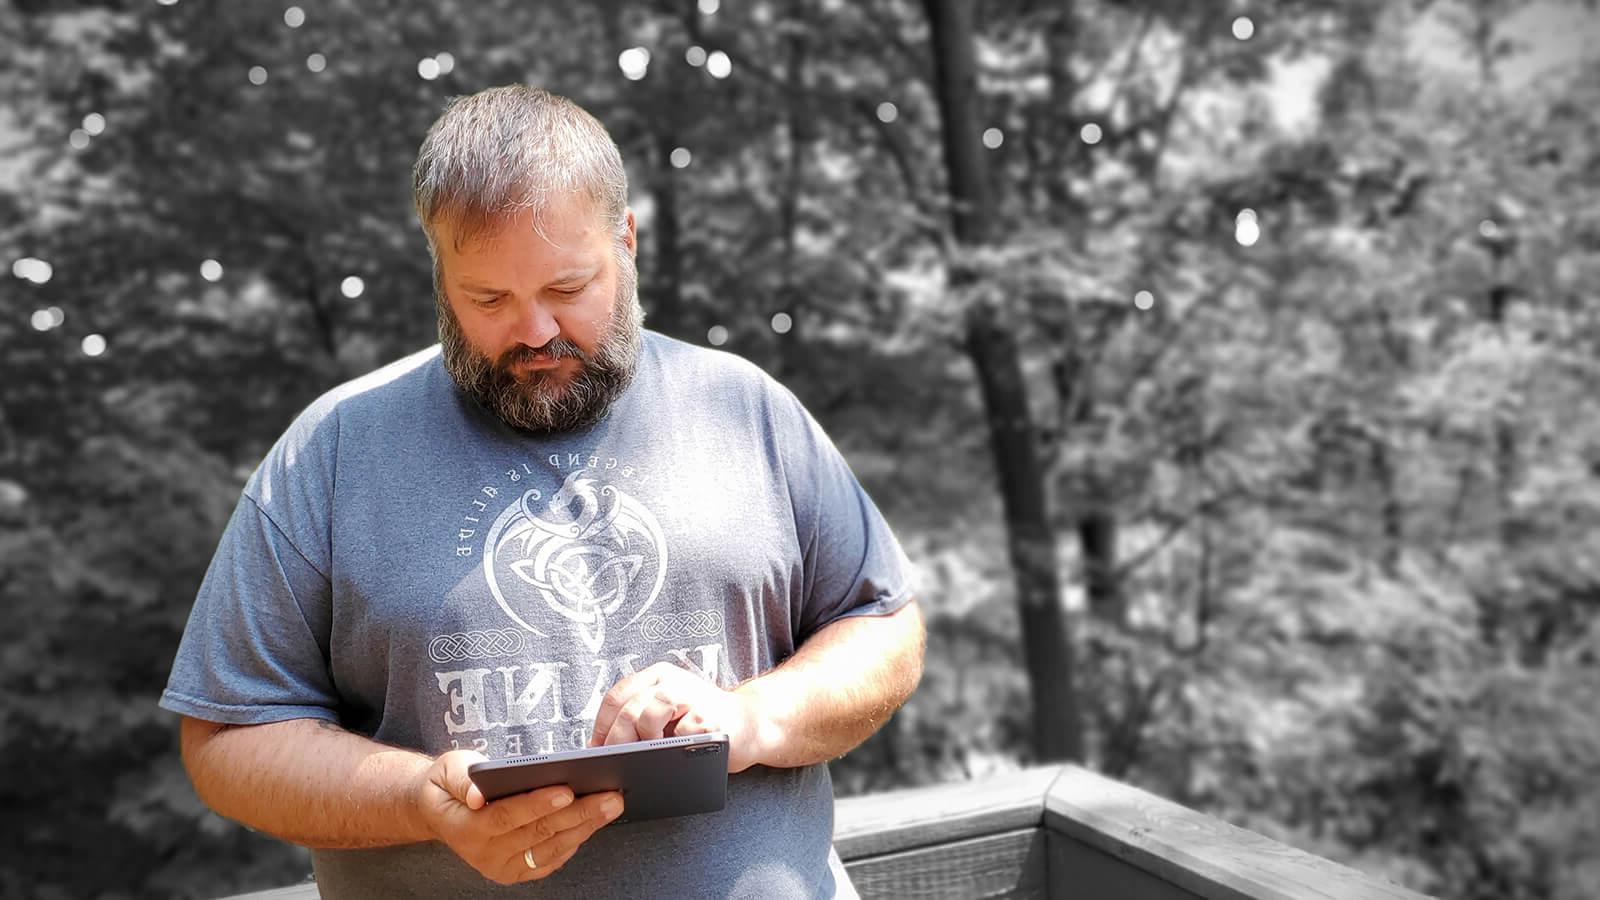 Grad Ryan Backa in a blue shirt with a white dragon design, holding an electronic tablet in front of a wooded area in greyscale.